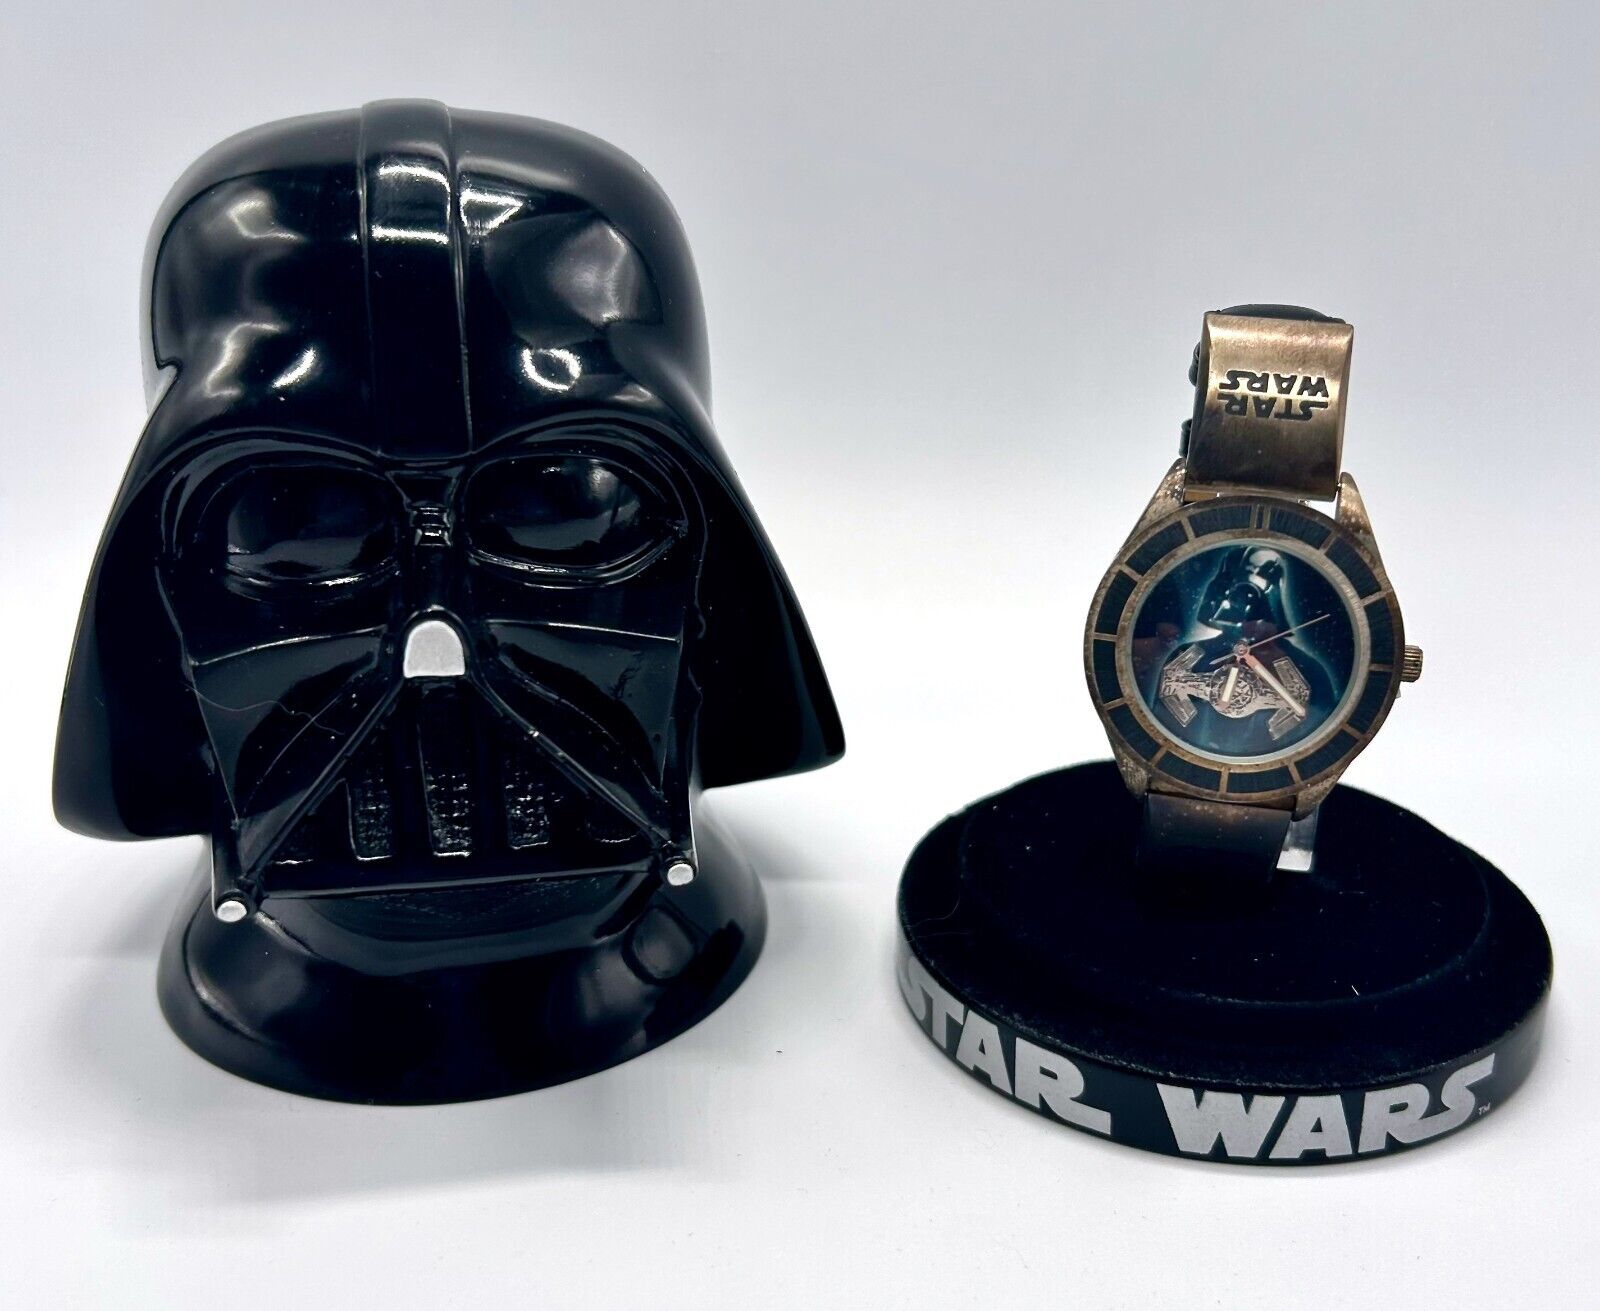 VINTAGE Fossil X Star Wars Darth Vader Watch 1997 - Limited Edition - Numbered